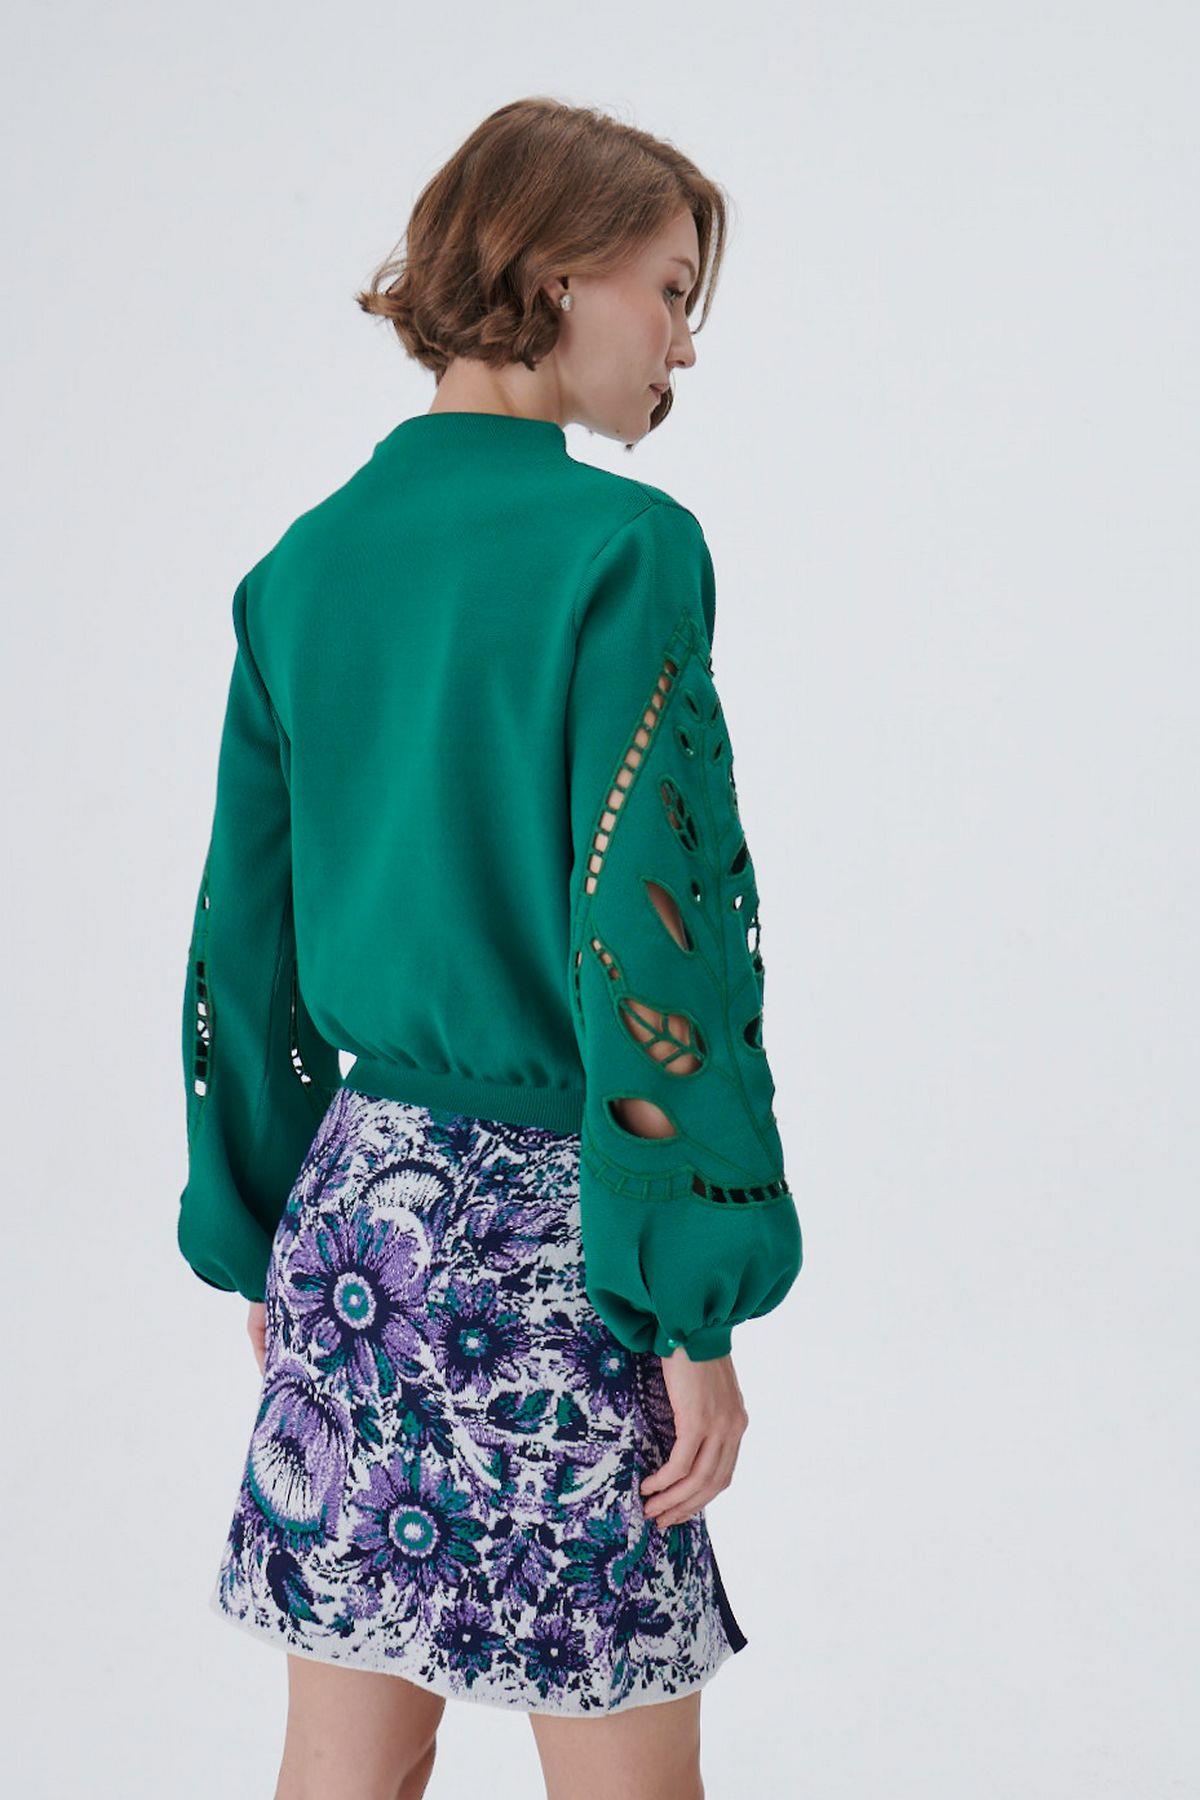 High Collar Sleeve Embroidered Green Knitwear Sweater